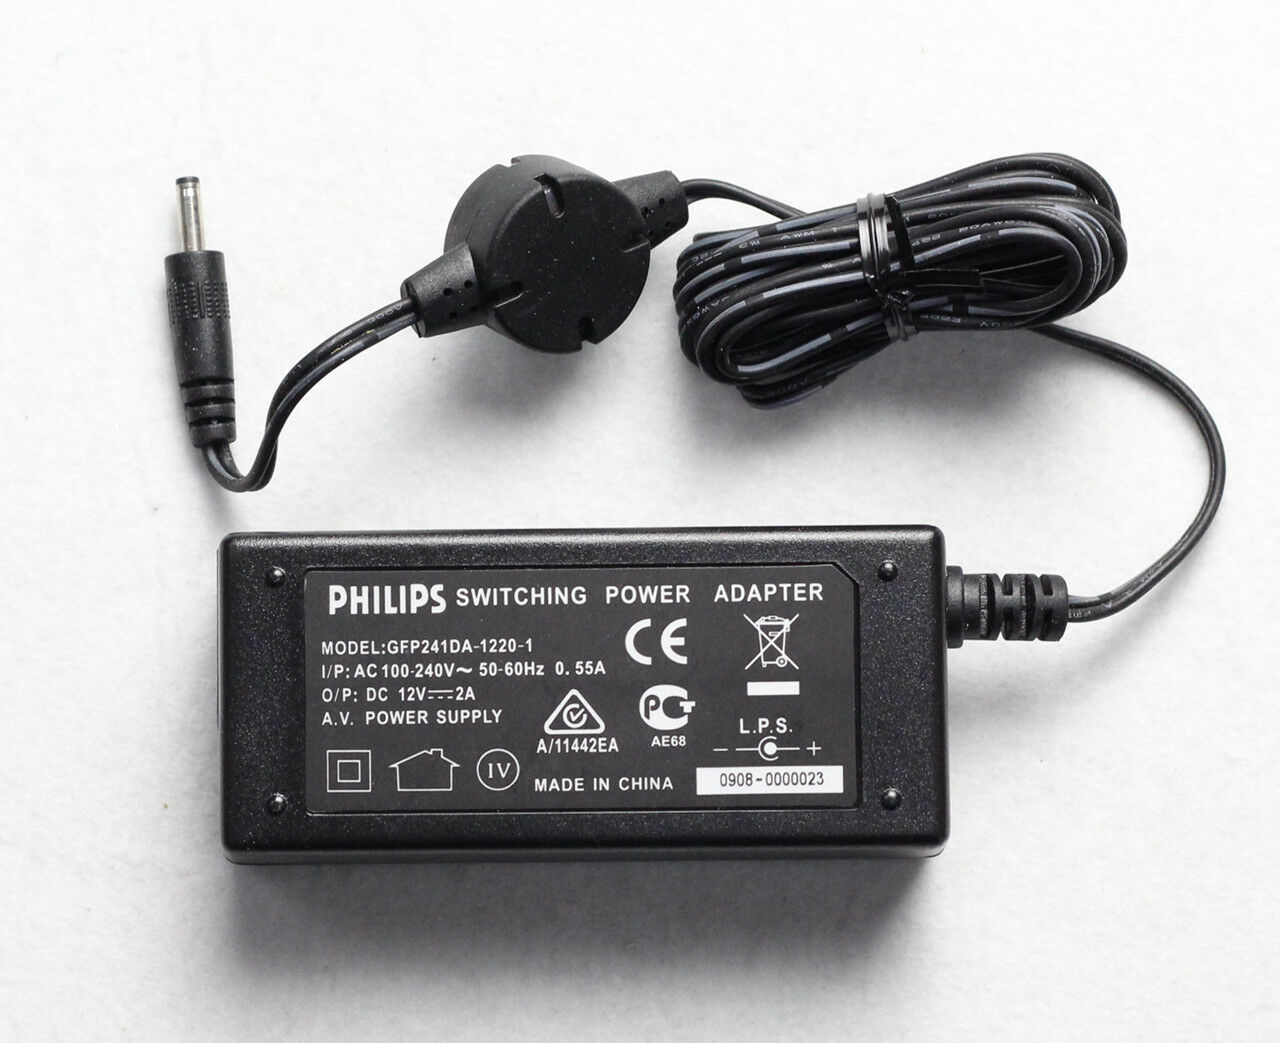 Switching Power Supply AC Adapter PHILIPS GFP241DA-1220-1 12V 2A Model: GFP241DA-1220-1 Type: AC